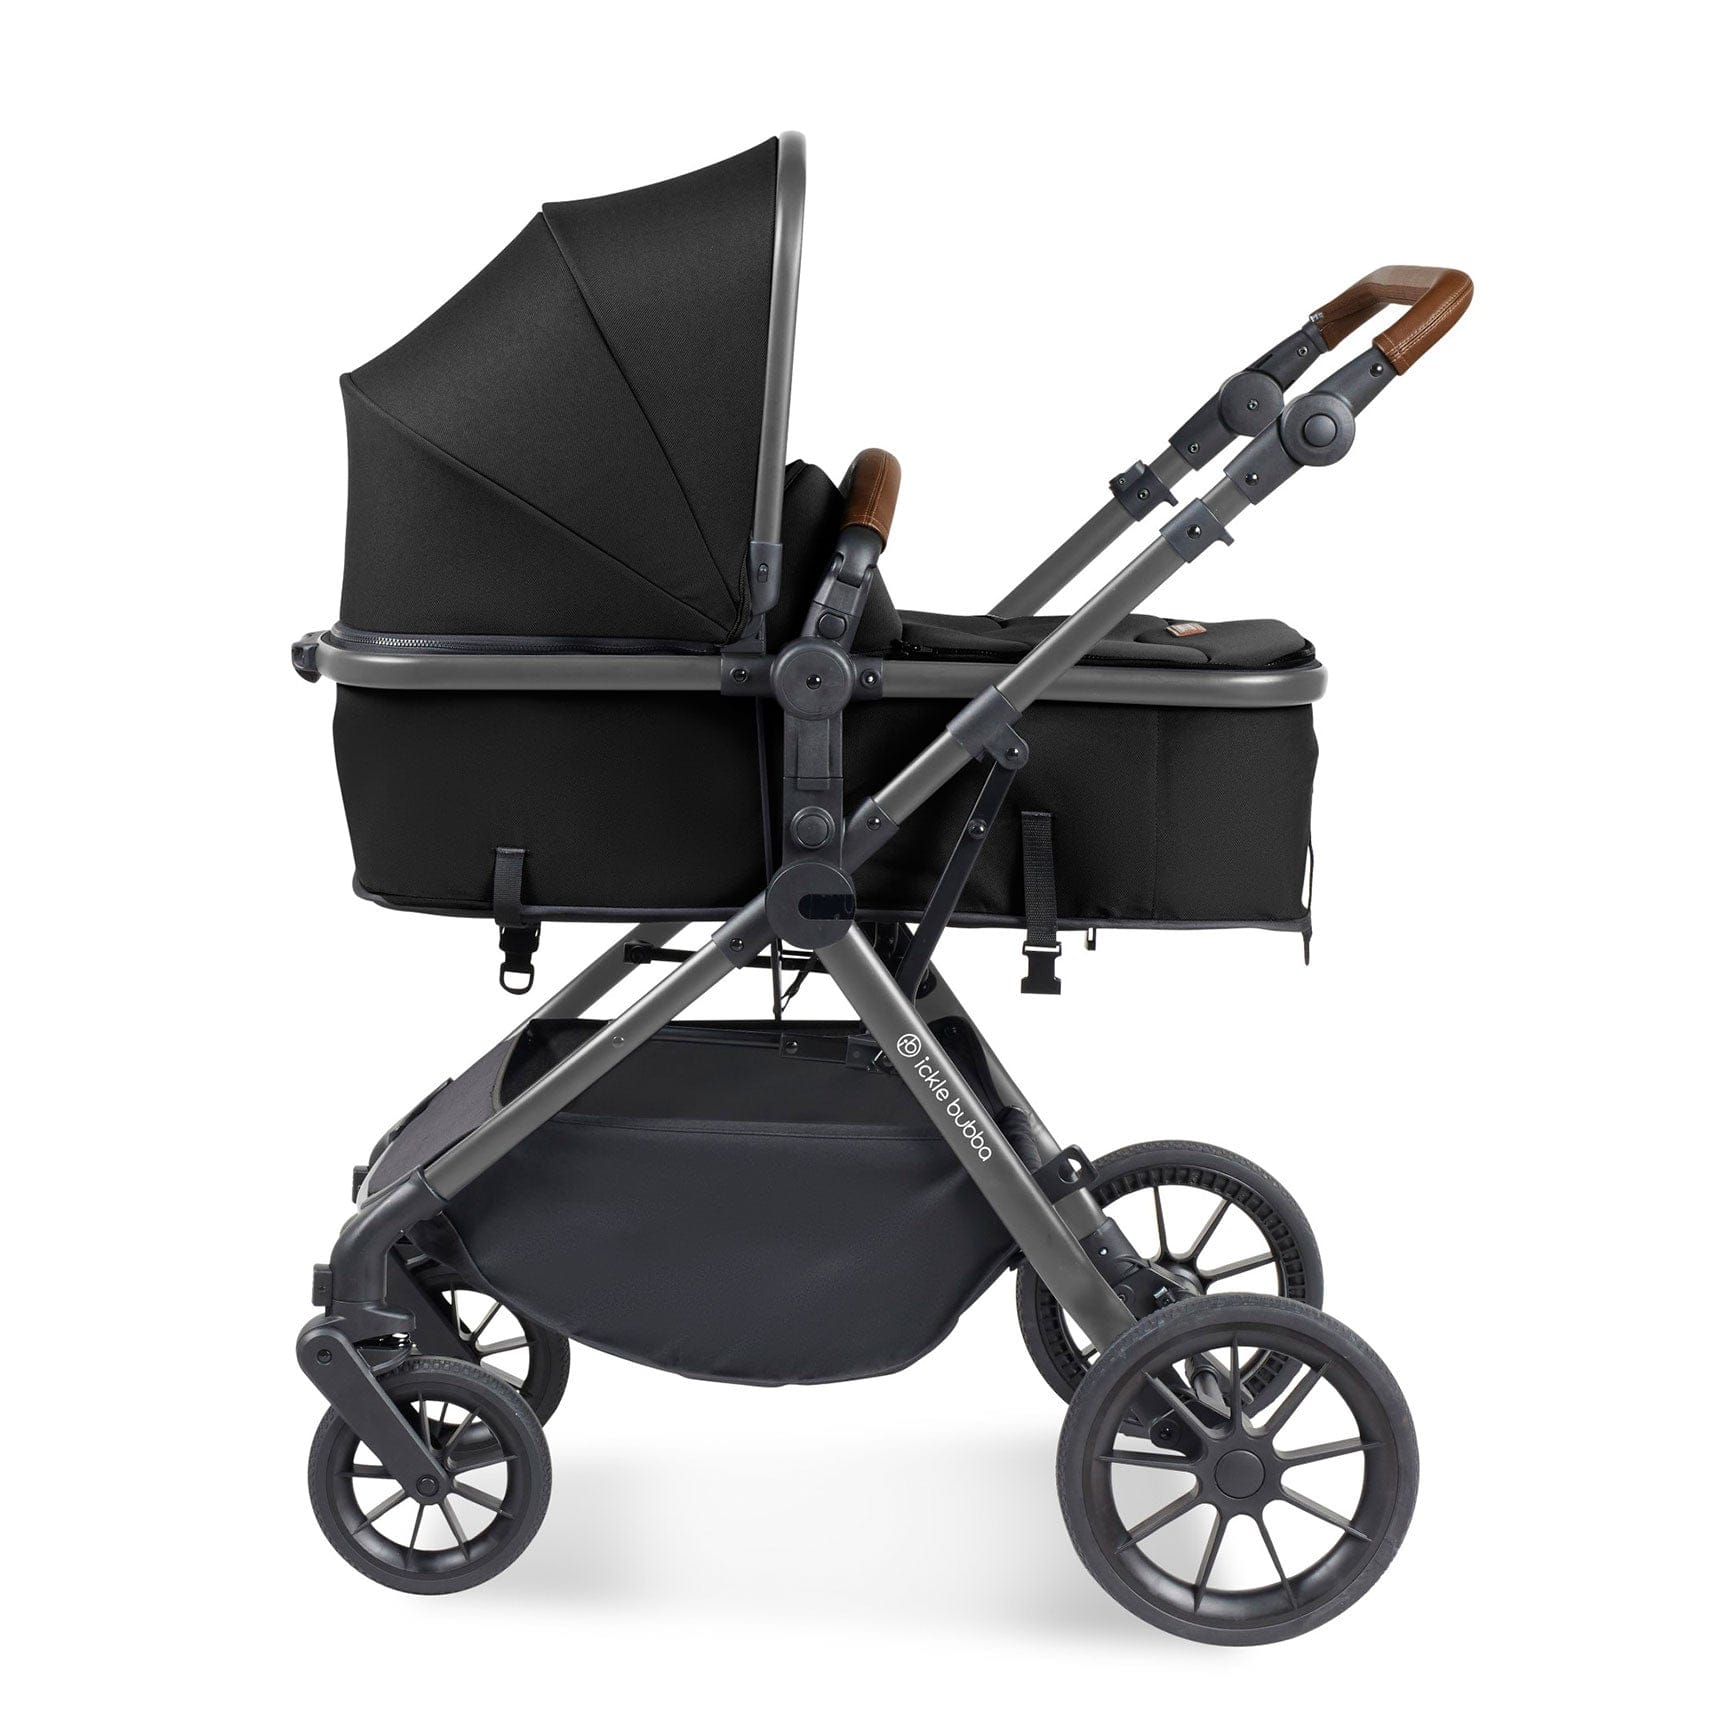 Ickle Bubba travel systems Ickle Bubba Cosmo All-in-One I-Size Travel System with Isofix Base - Black/Gun Metal 10-007-300-135